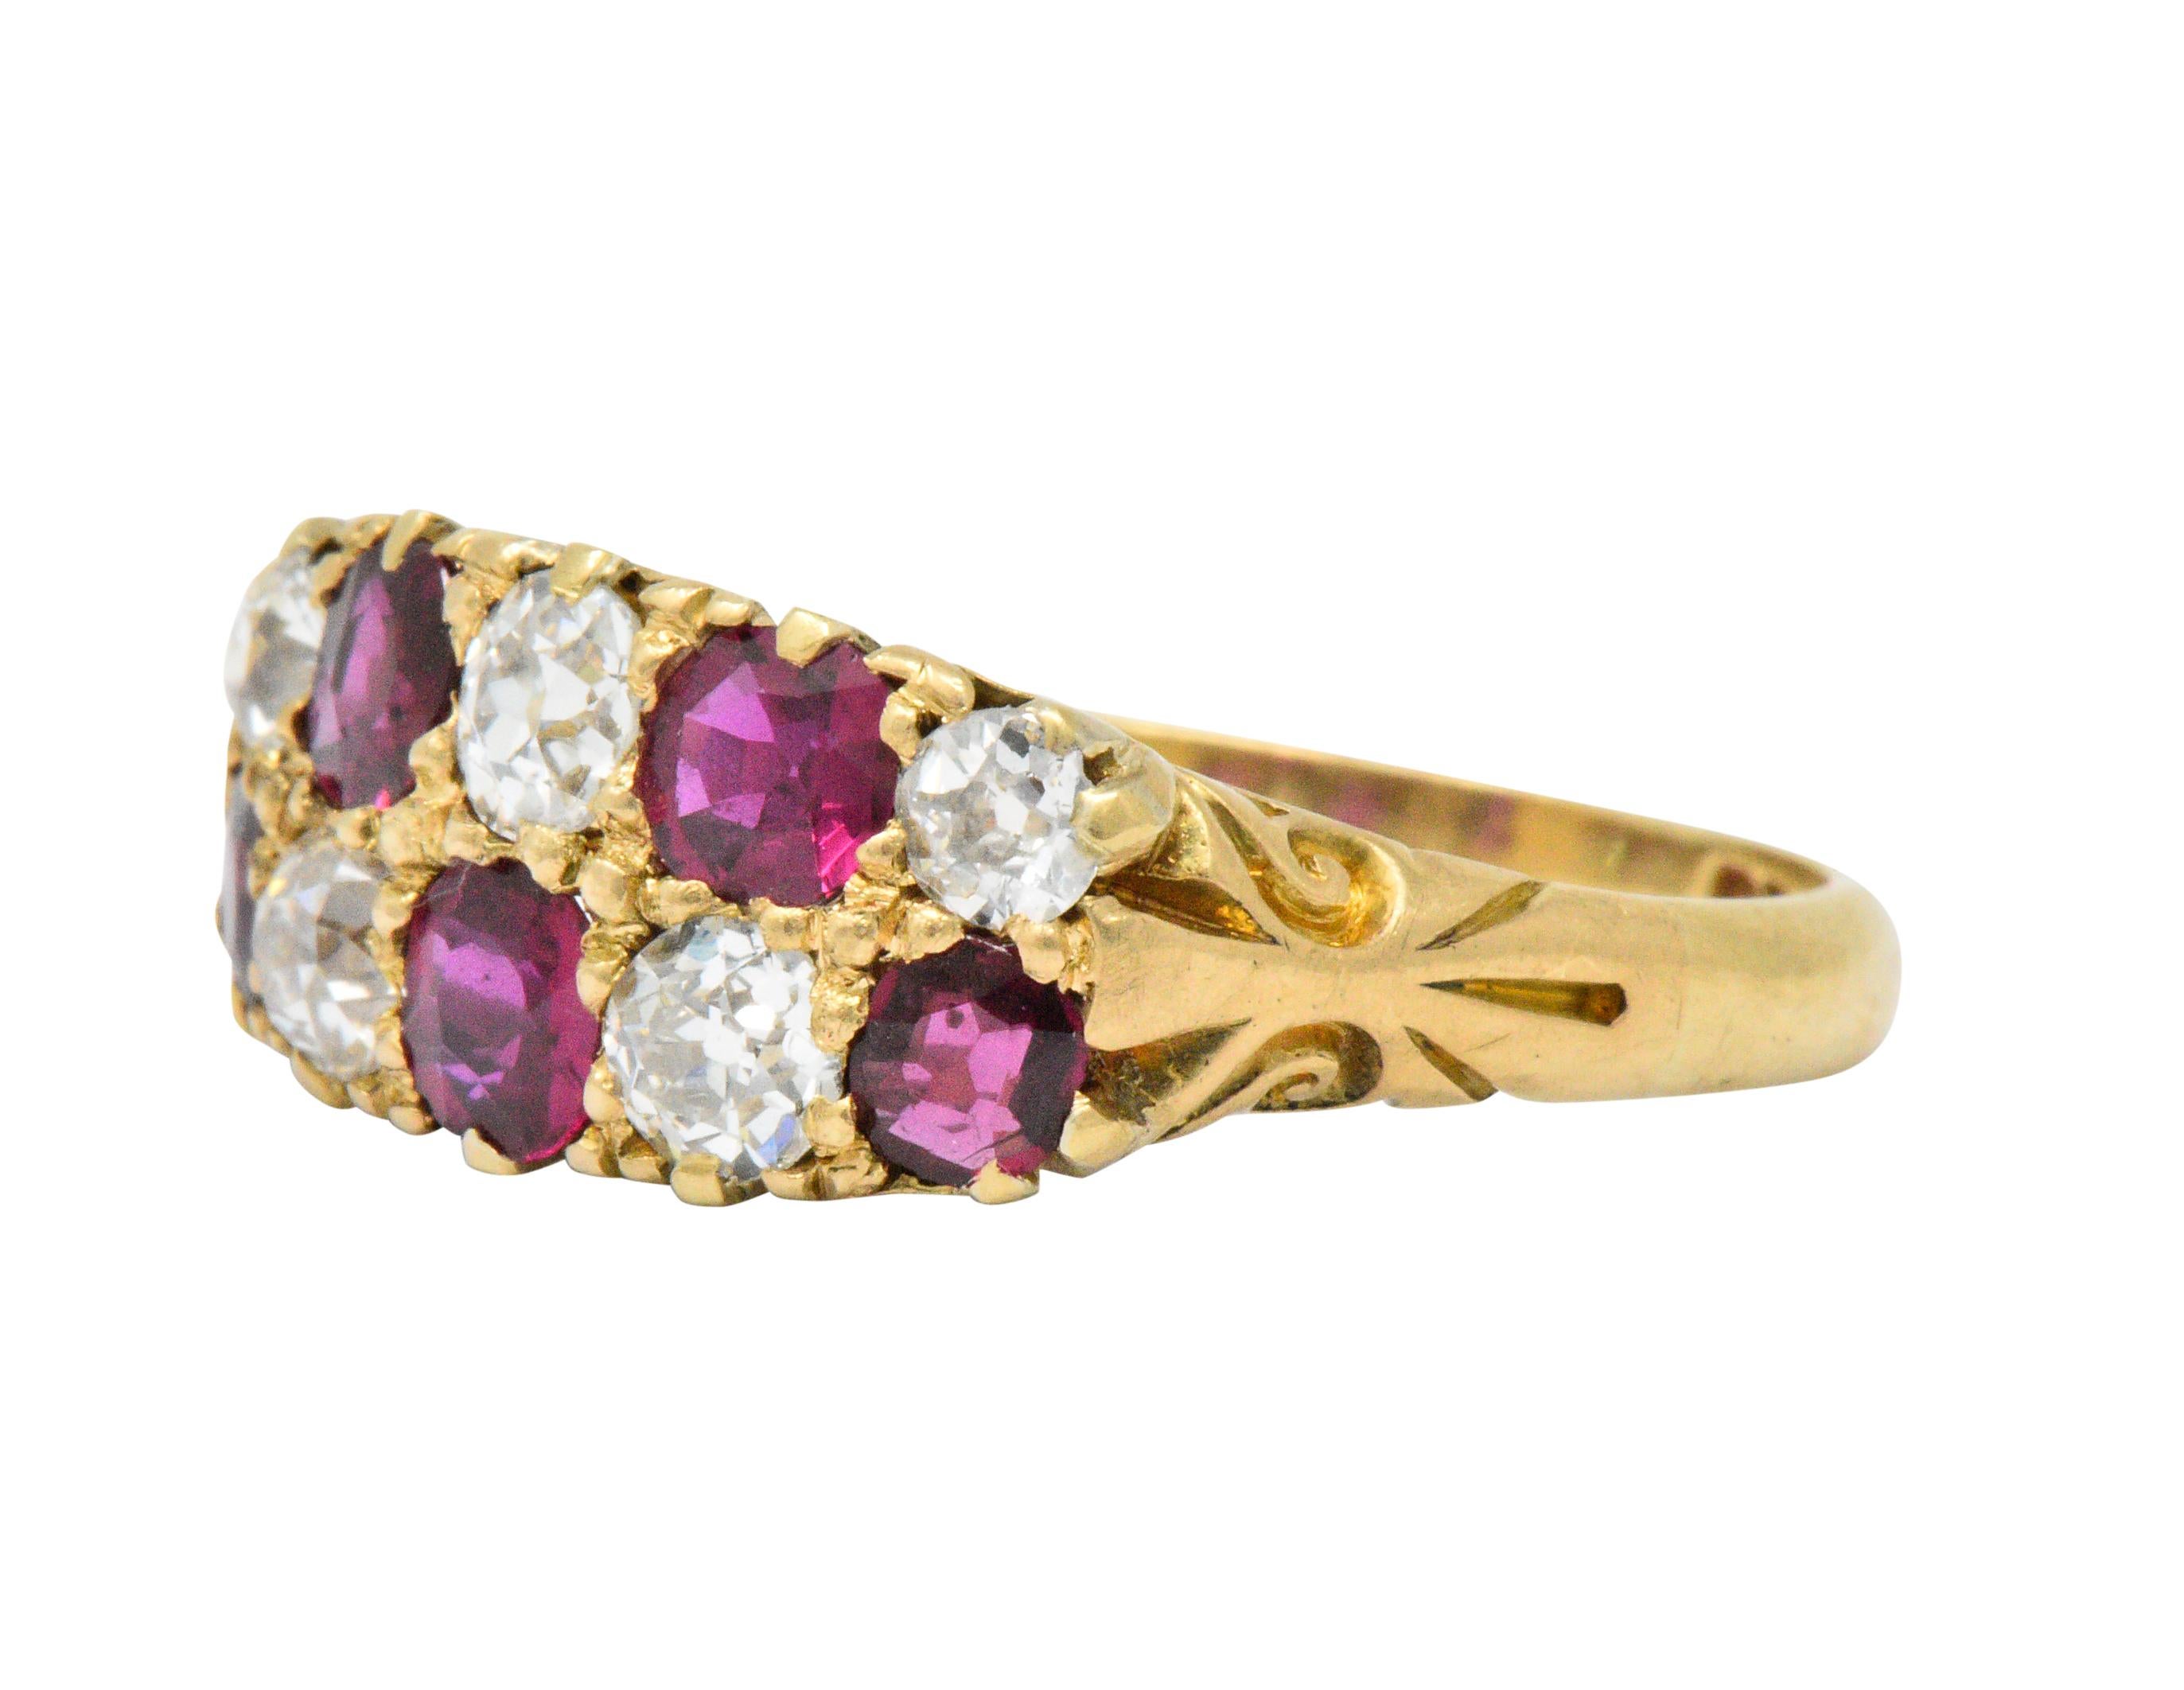 Set to the front with 5 rubies weighing approximately 1.25 carats, bright very slightly 
purplish red to red, and old mine cut diamonds weighing approximately 0.80 CTW, GHI color and VS to SI clarity

Two rows of staggered diamonds and